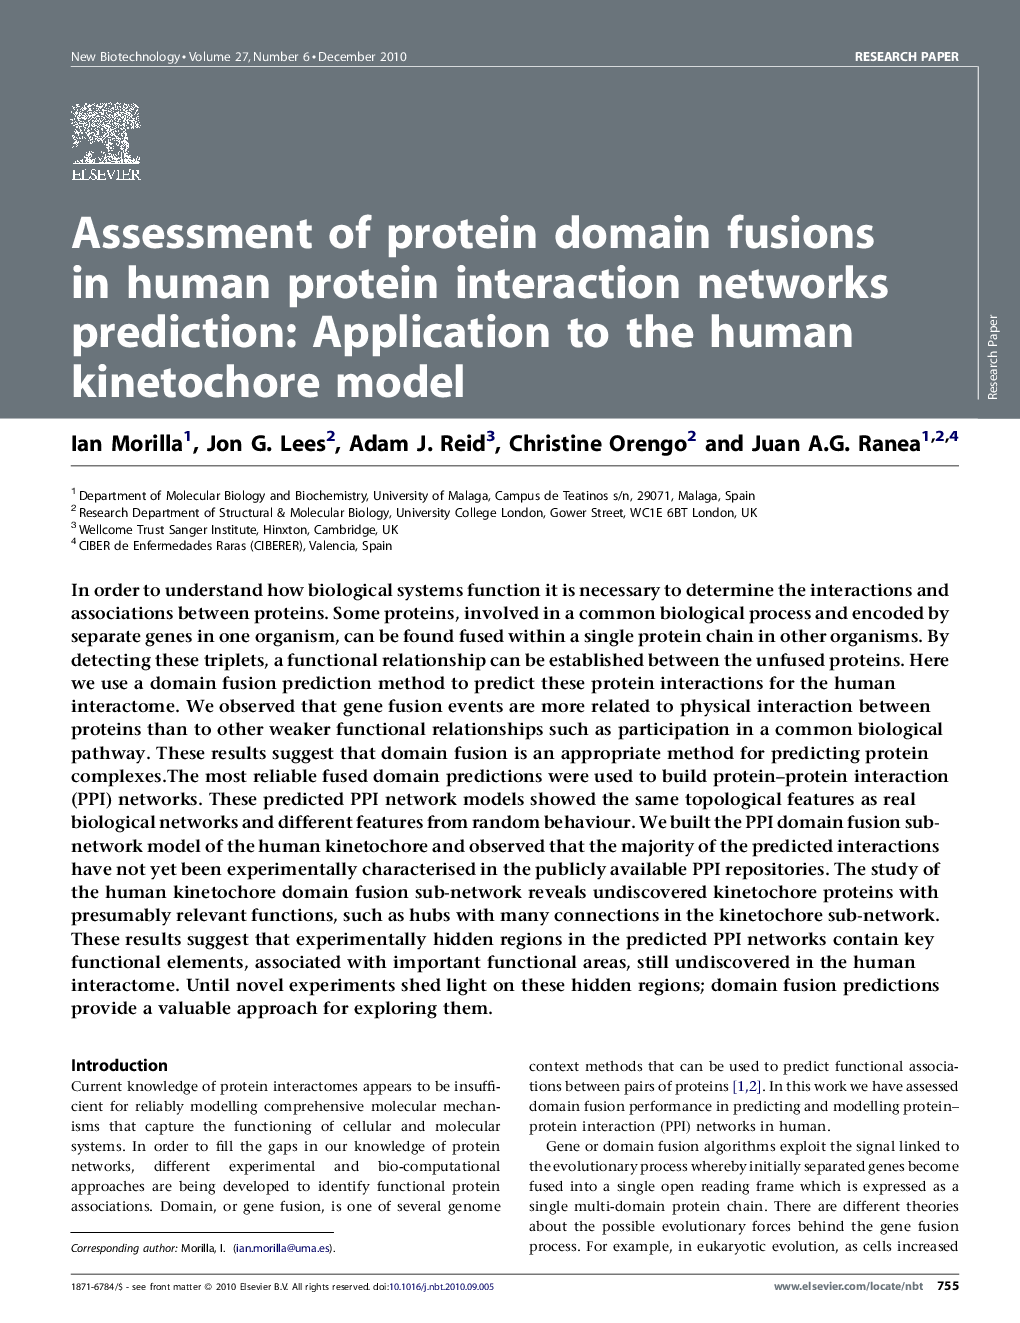 Assessment of protein domain fusions in human protein interaction networks prediction: Application to the human kinetochore model